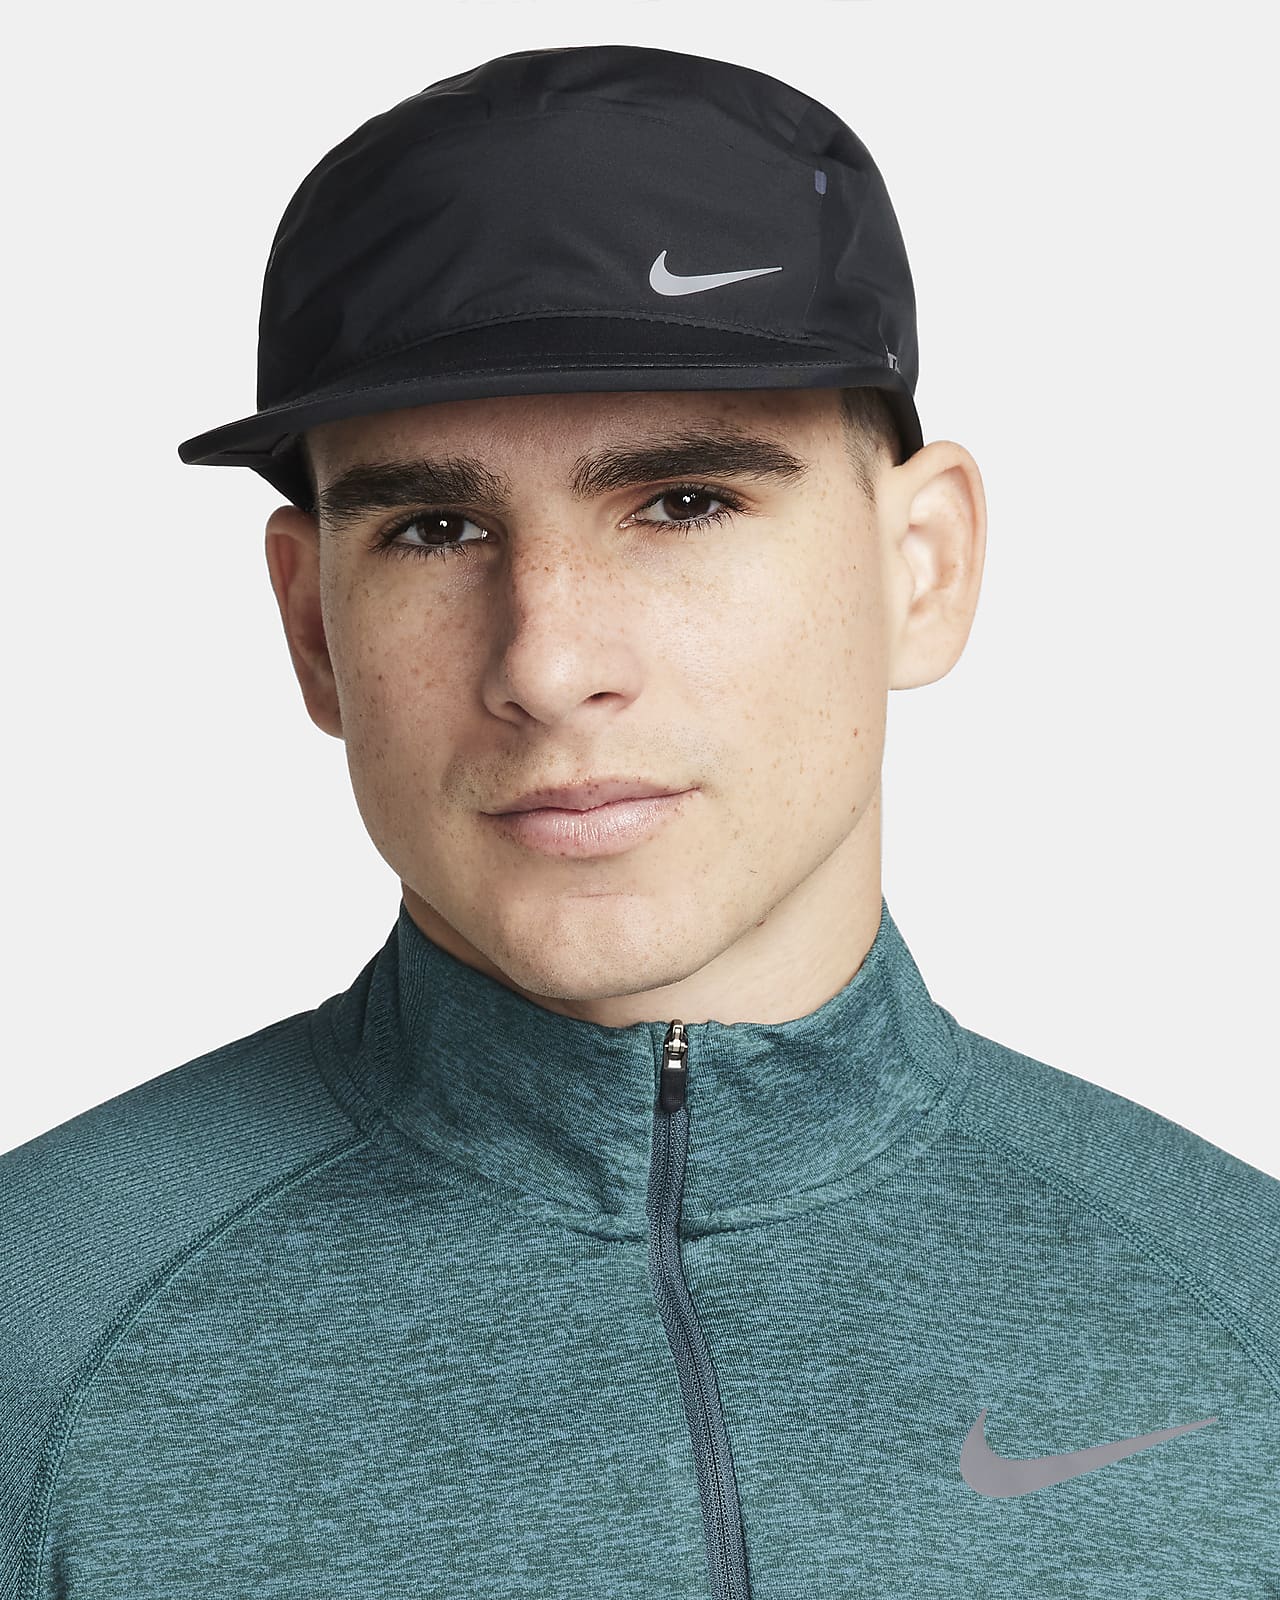 Nike Storm-FIT ADV Fly Cap. Unstructured AeroBill